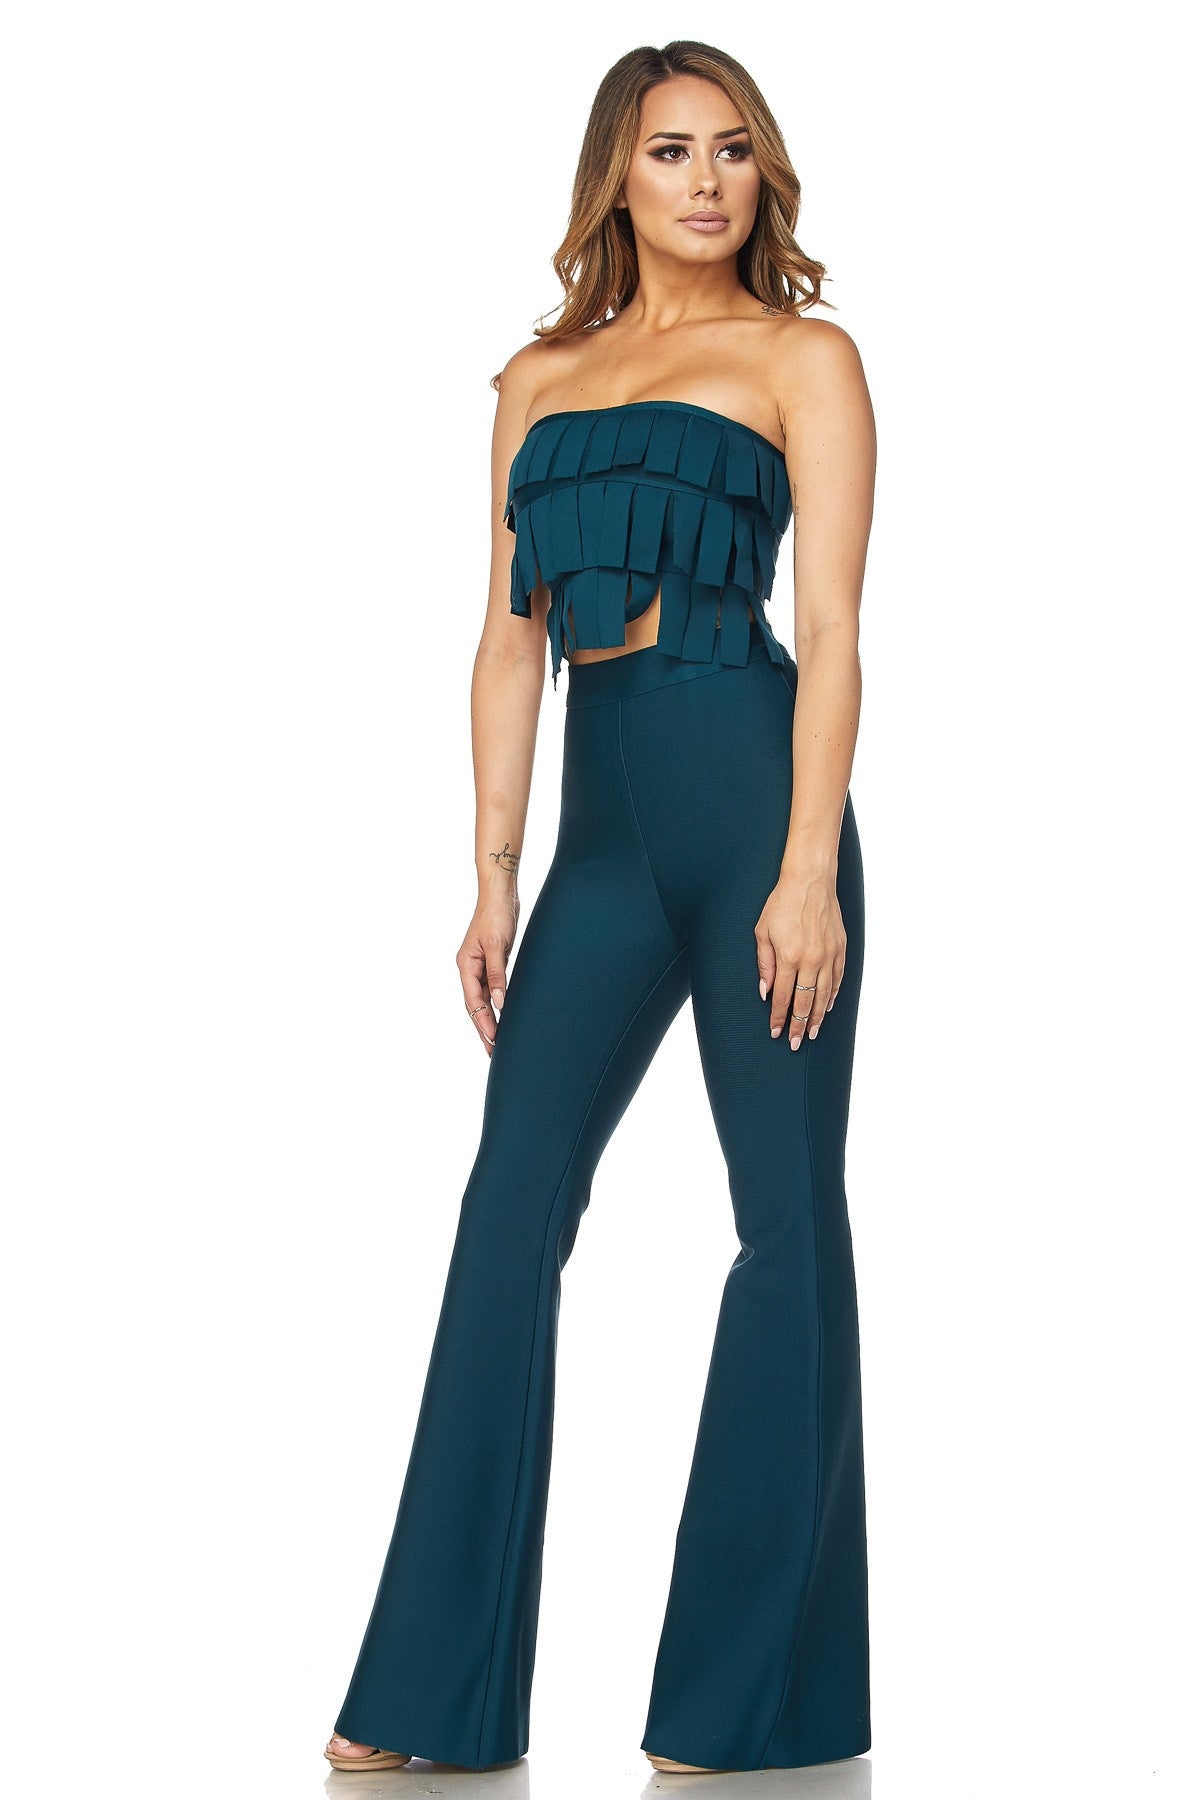 Two Piece Bandage Crop Top and Pant Set - steven wick